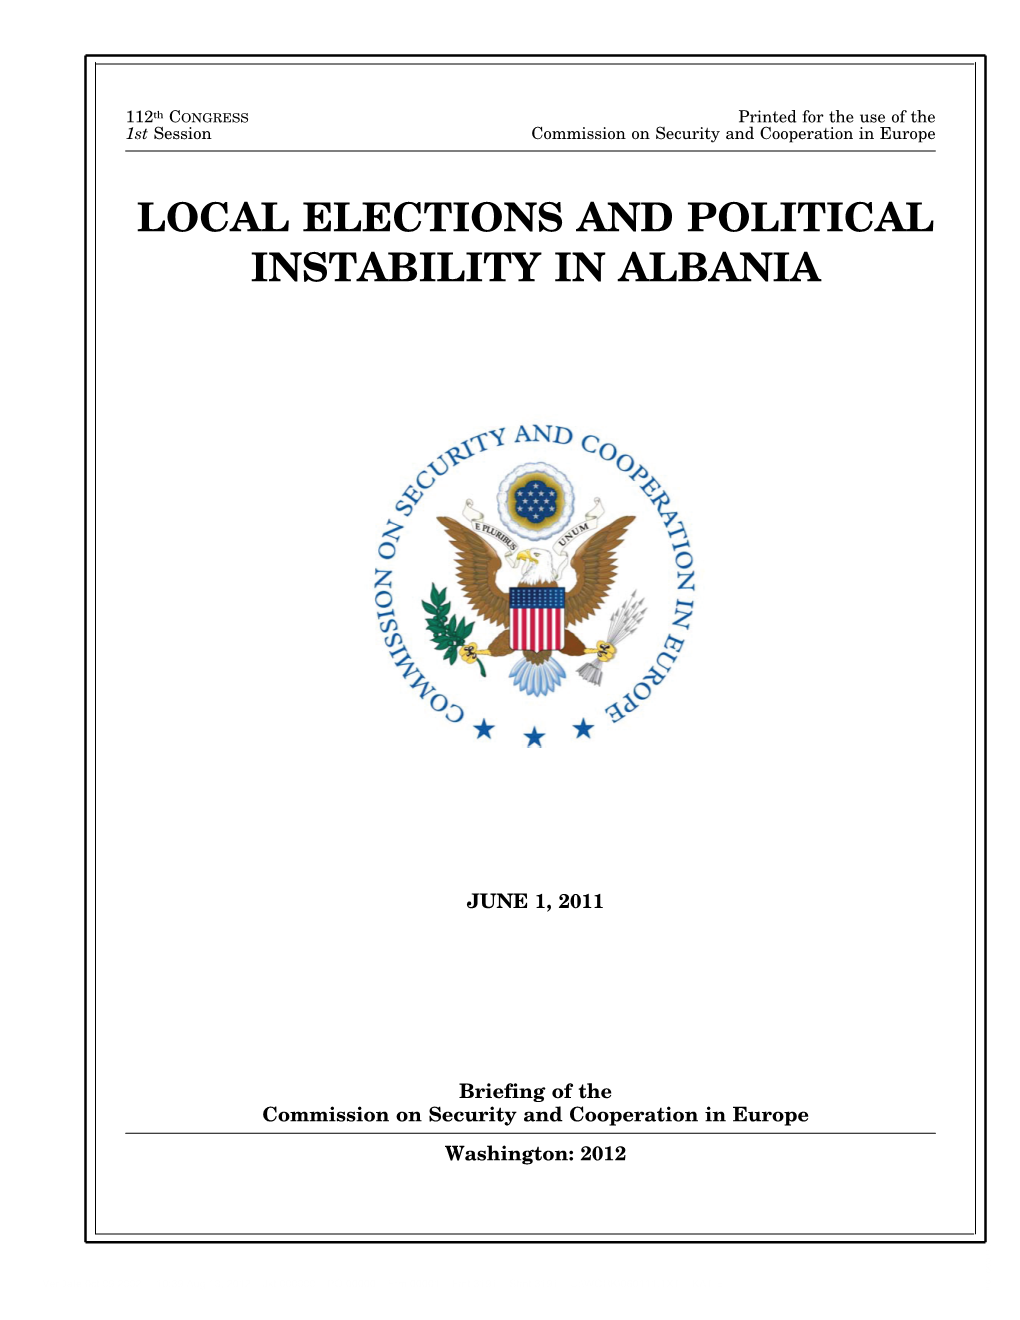 Local Elections and Political Instability in Albania.PDF